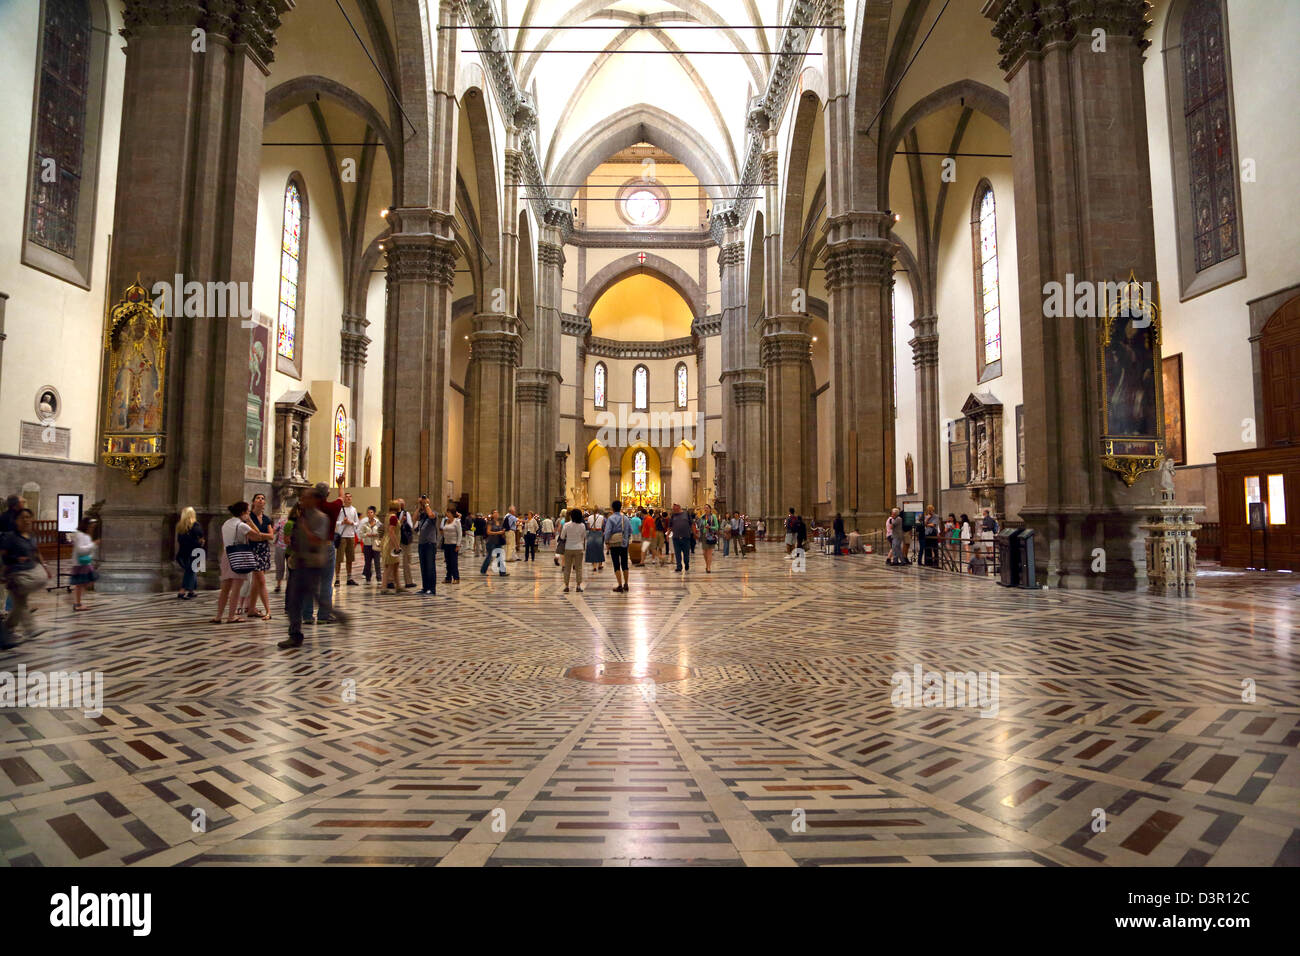 Interior of the Duomo in Florence Italy Stock Photo